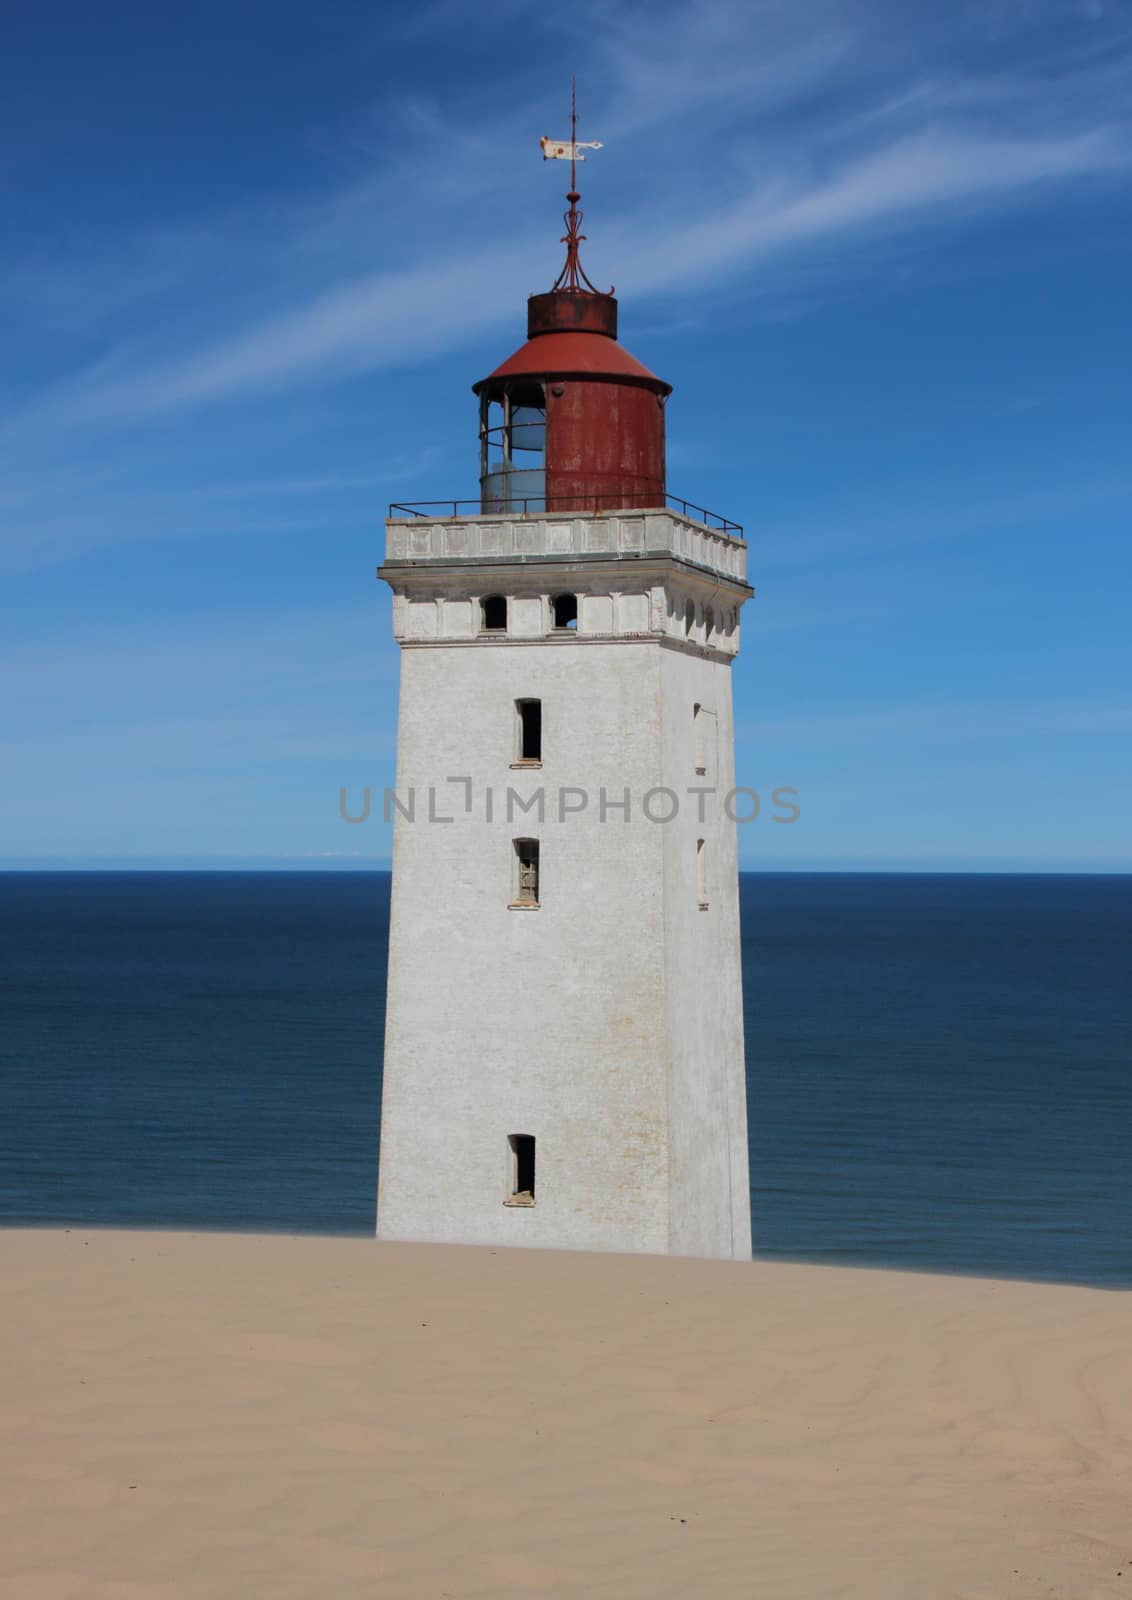 Lighthouse with Sand Dune and Blue Ocean in Horizon by HoleInTheBox